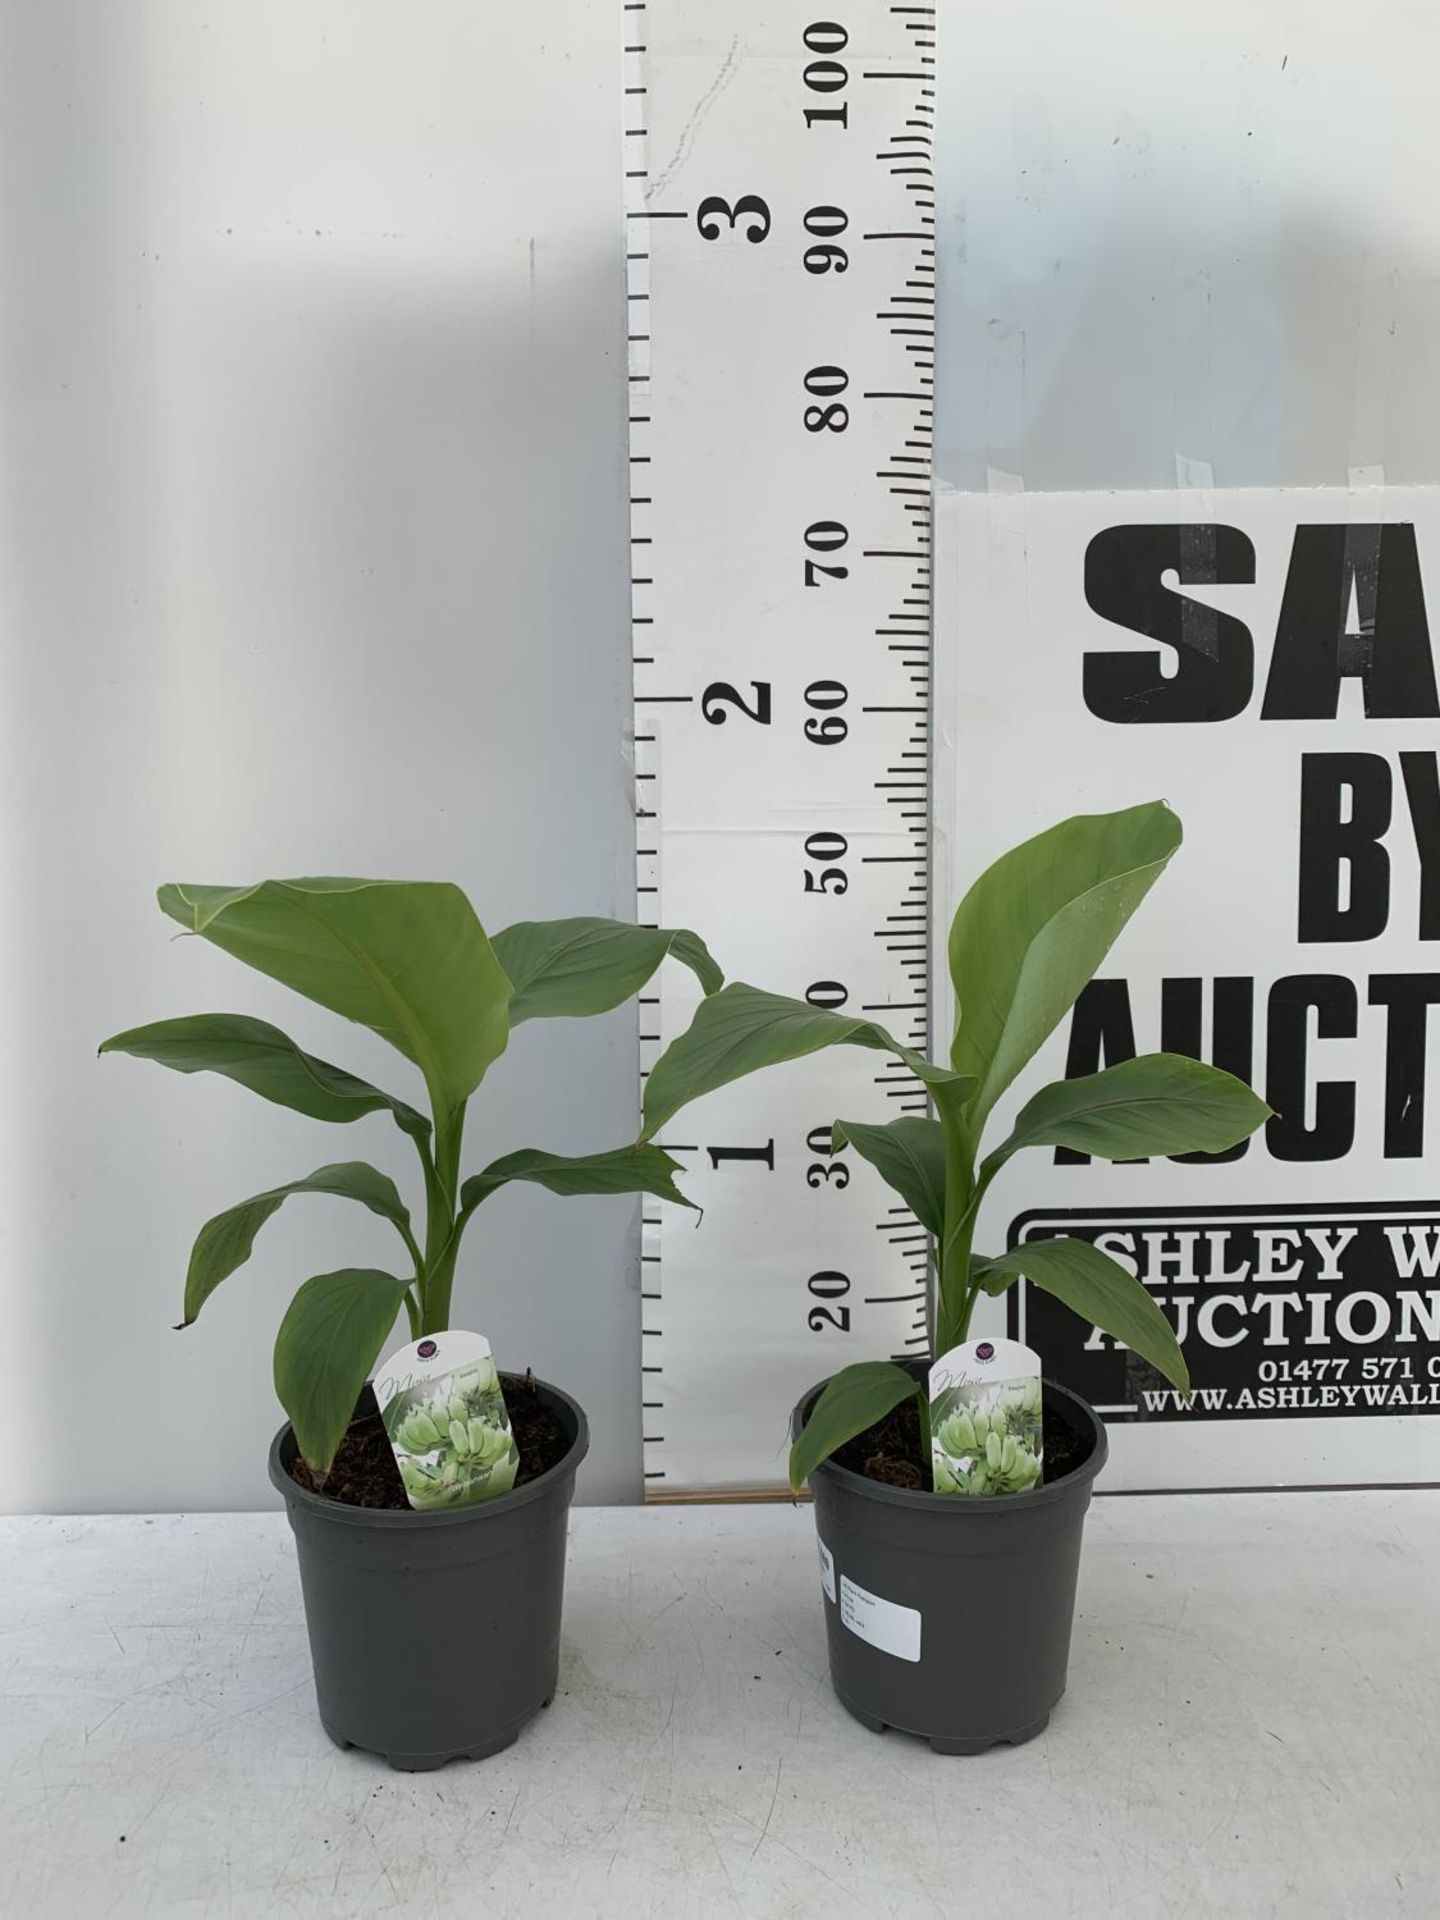 TWO MUSA BASJOO BANANA PLANTS IN 2 LTR POTS 45CM TALL TO BE SOLD FOR THE TWO NO VAT - Image 2 of 8